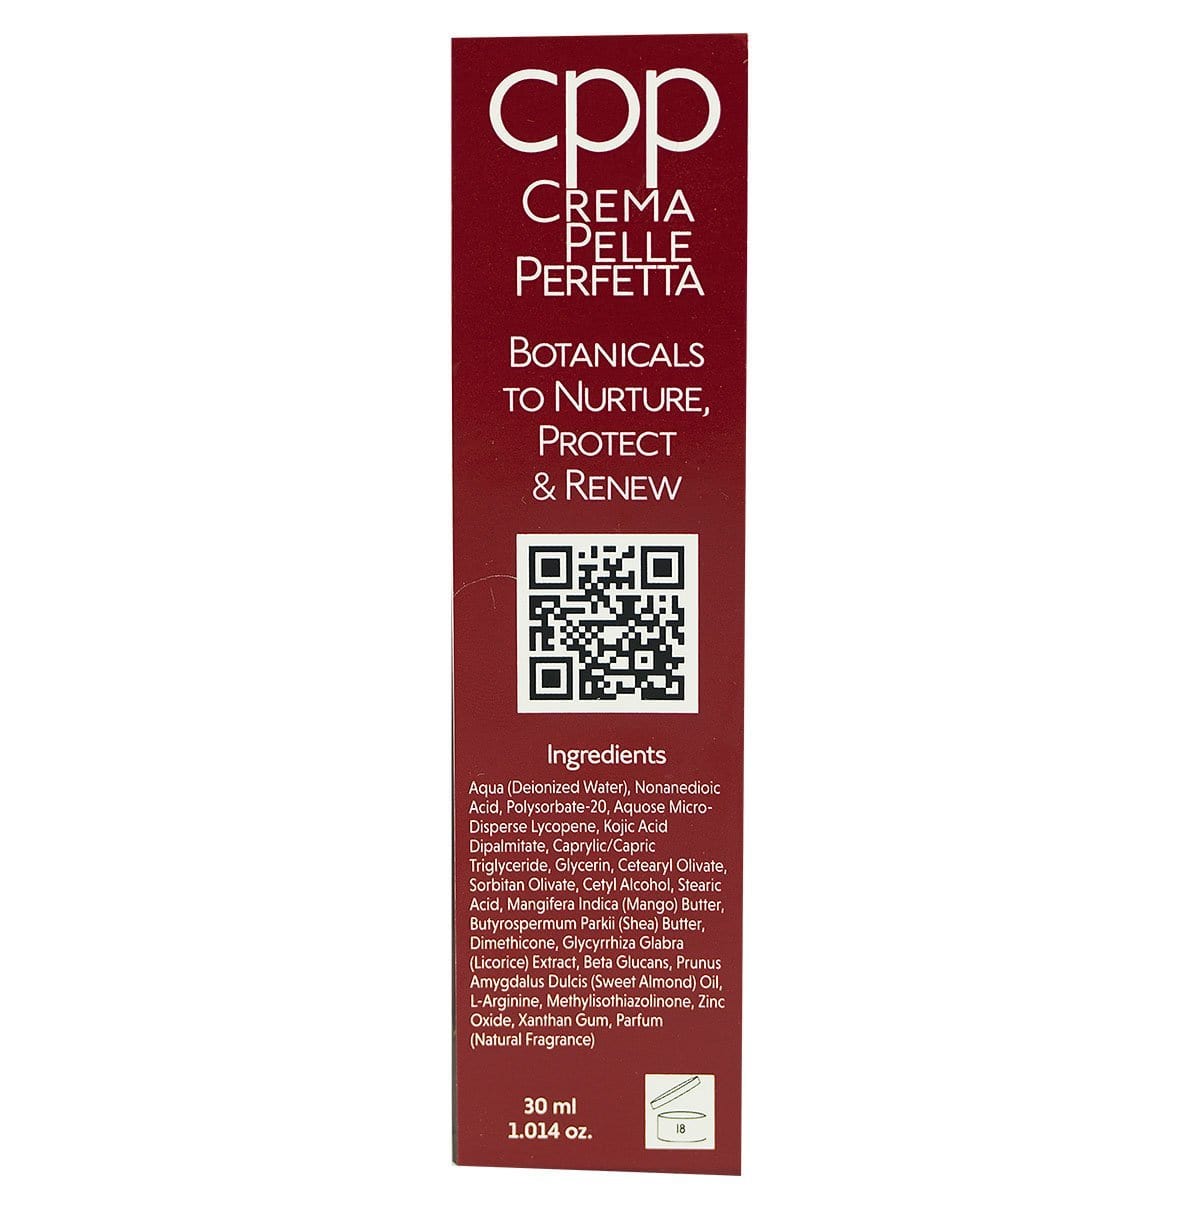 Buy 2 and SAVE 15% Crema Pelle Perfetta – Dermatologist Recommended Treatment for Rosacea, Dark Spots, Sun Damage, and Blemishes with All Natural Ingredients - Buy 2 and Save